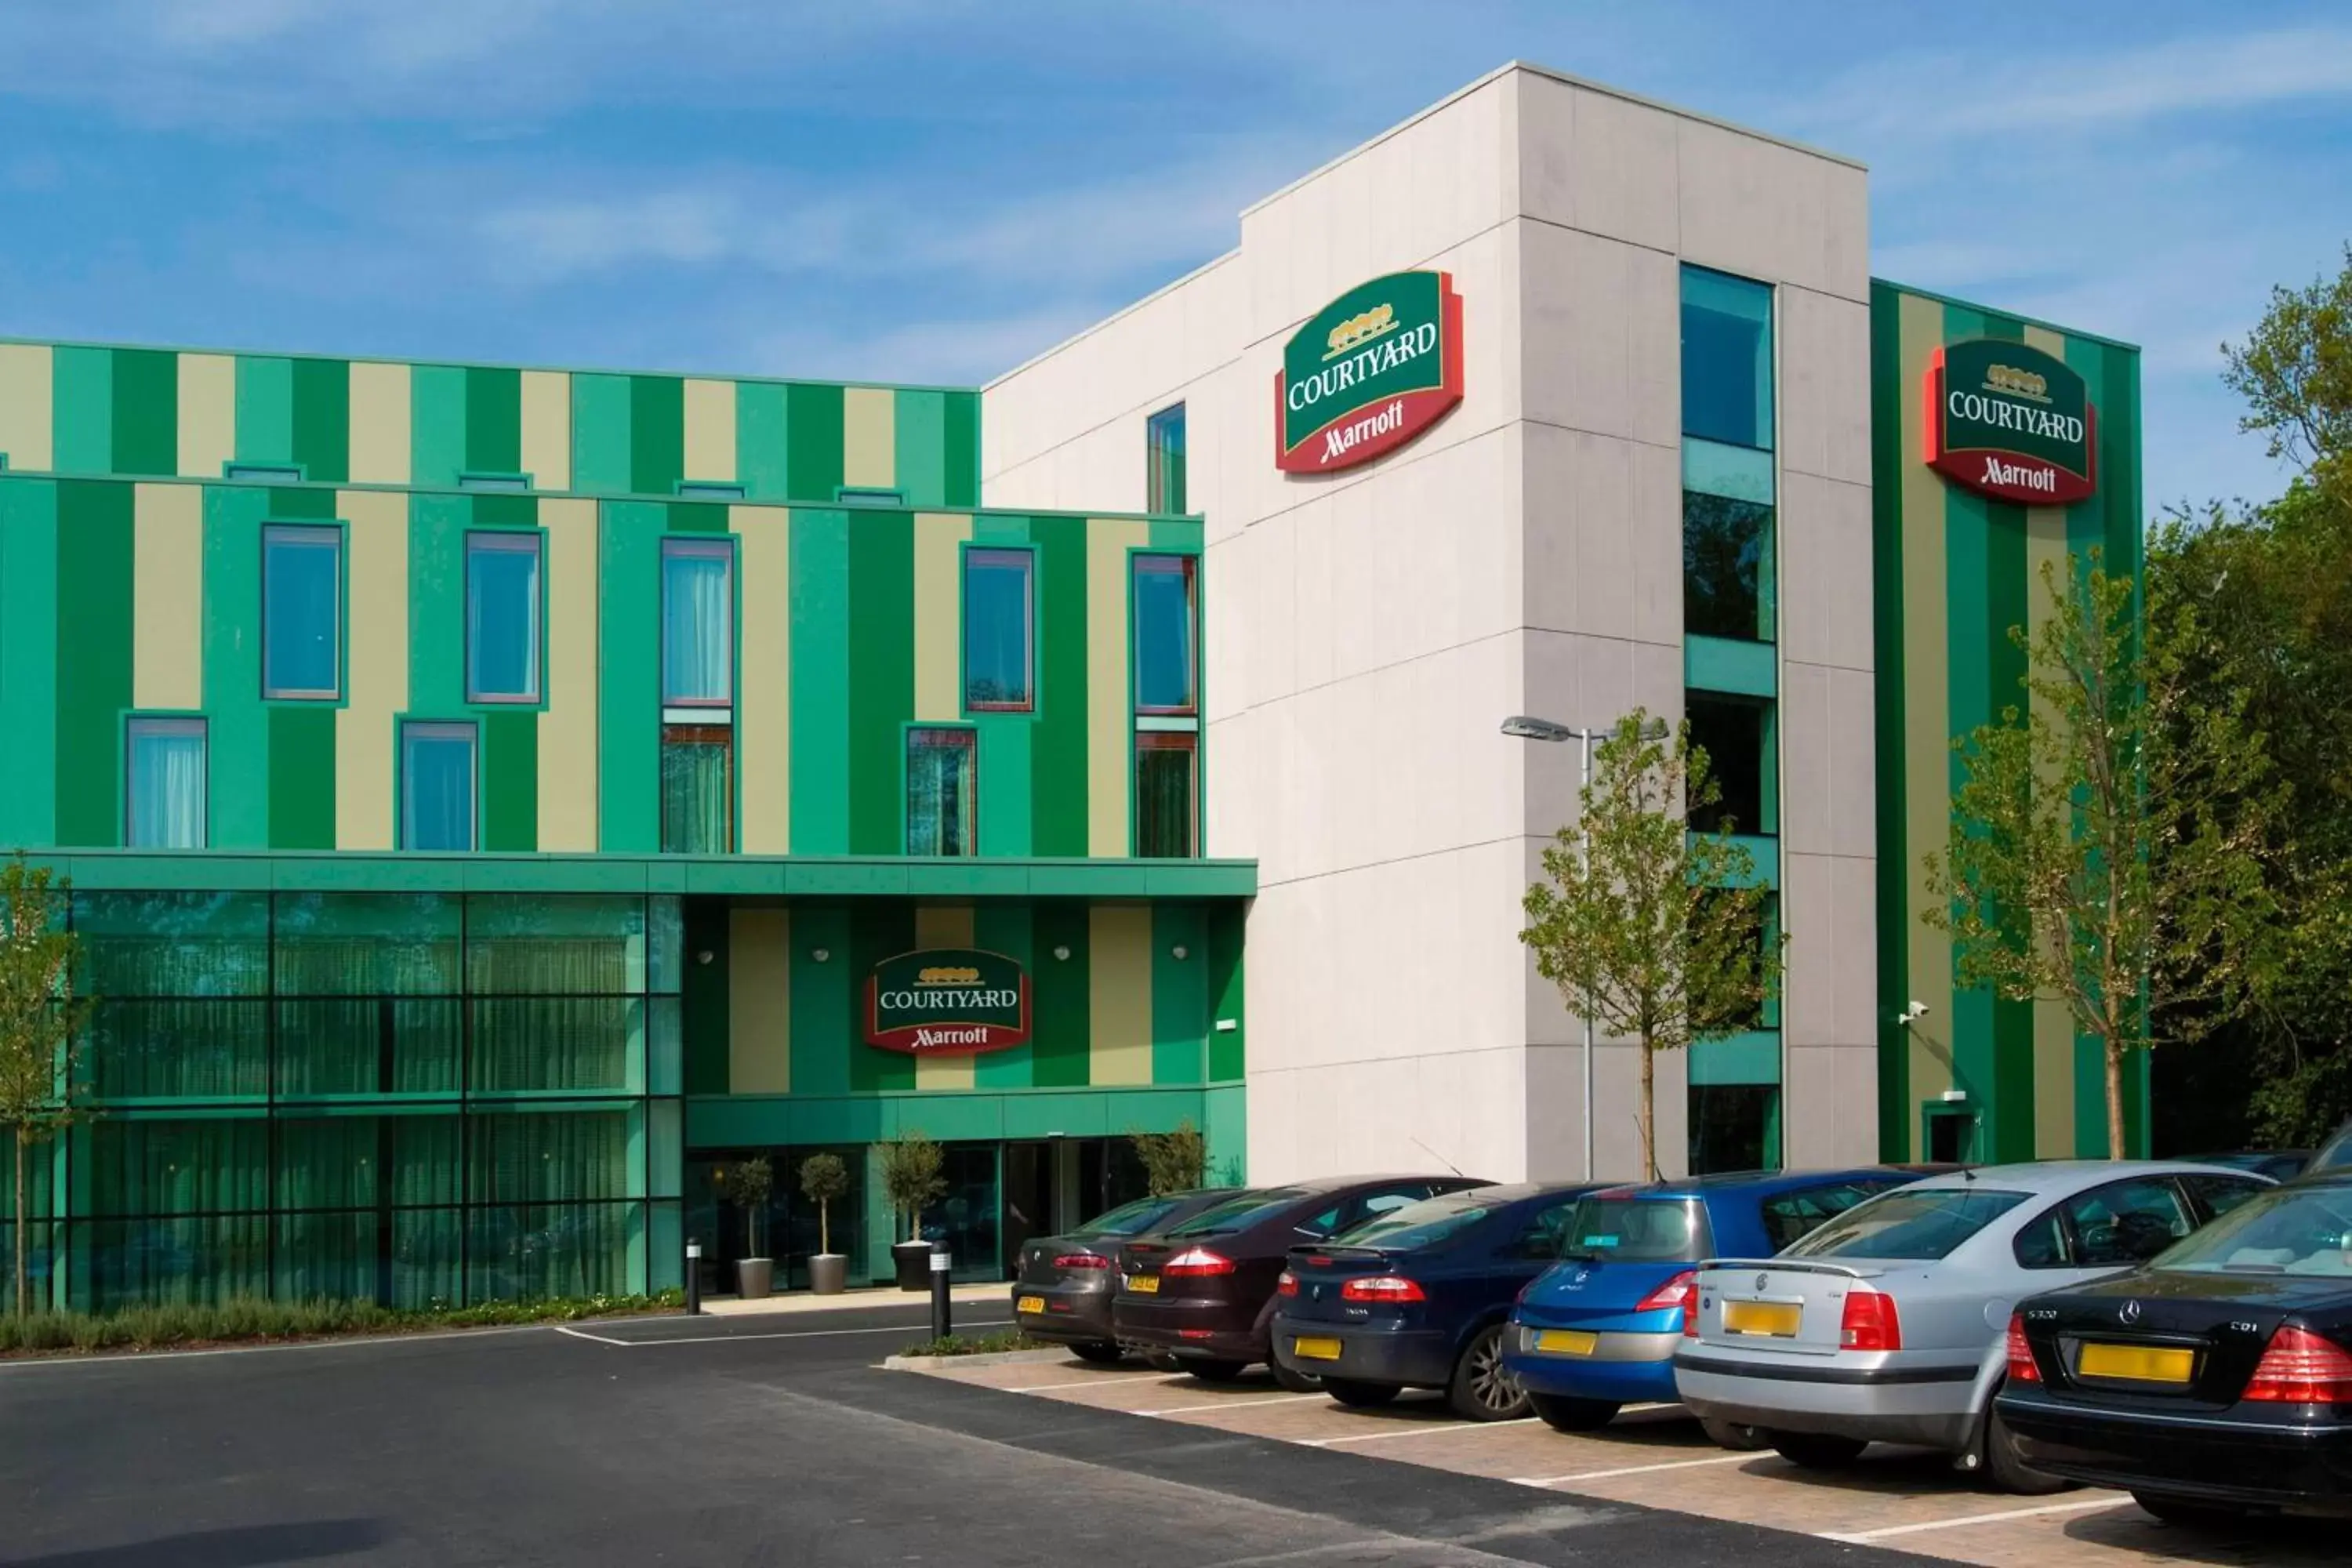 Property Building in Courtyard by Marriott London Gatwick Airport